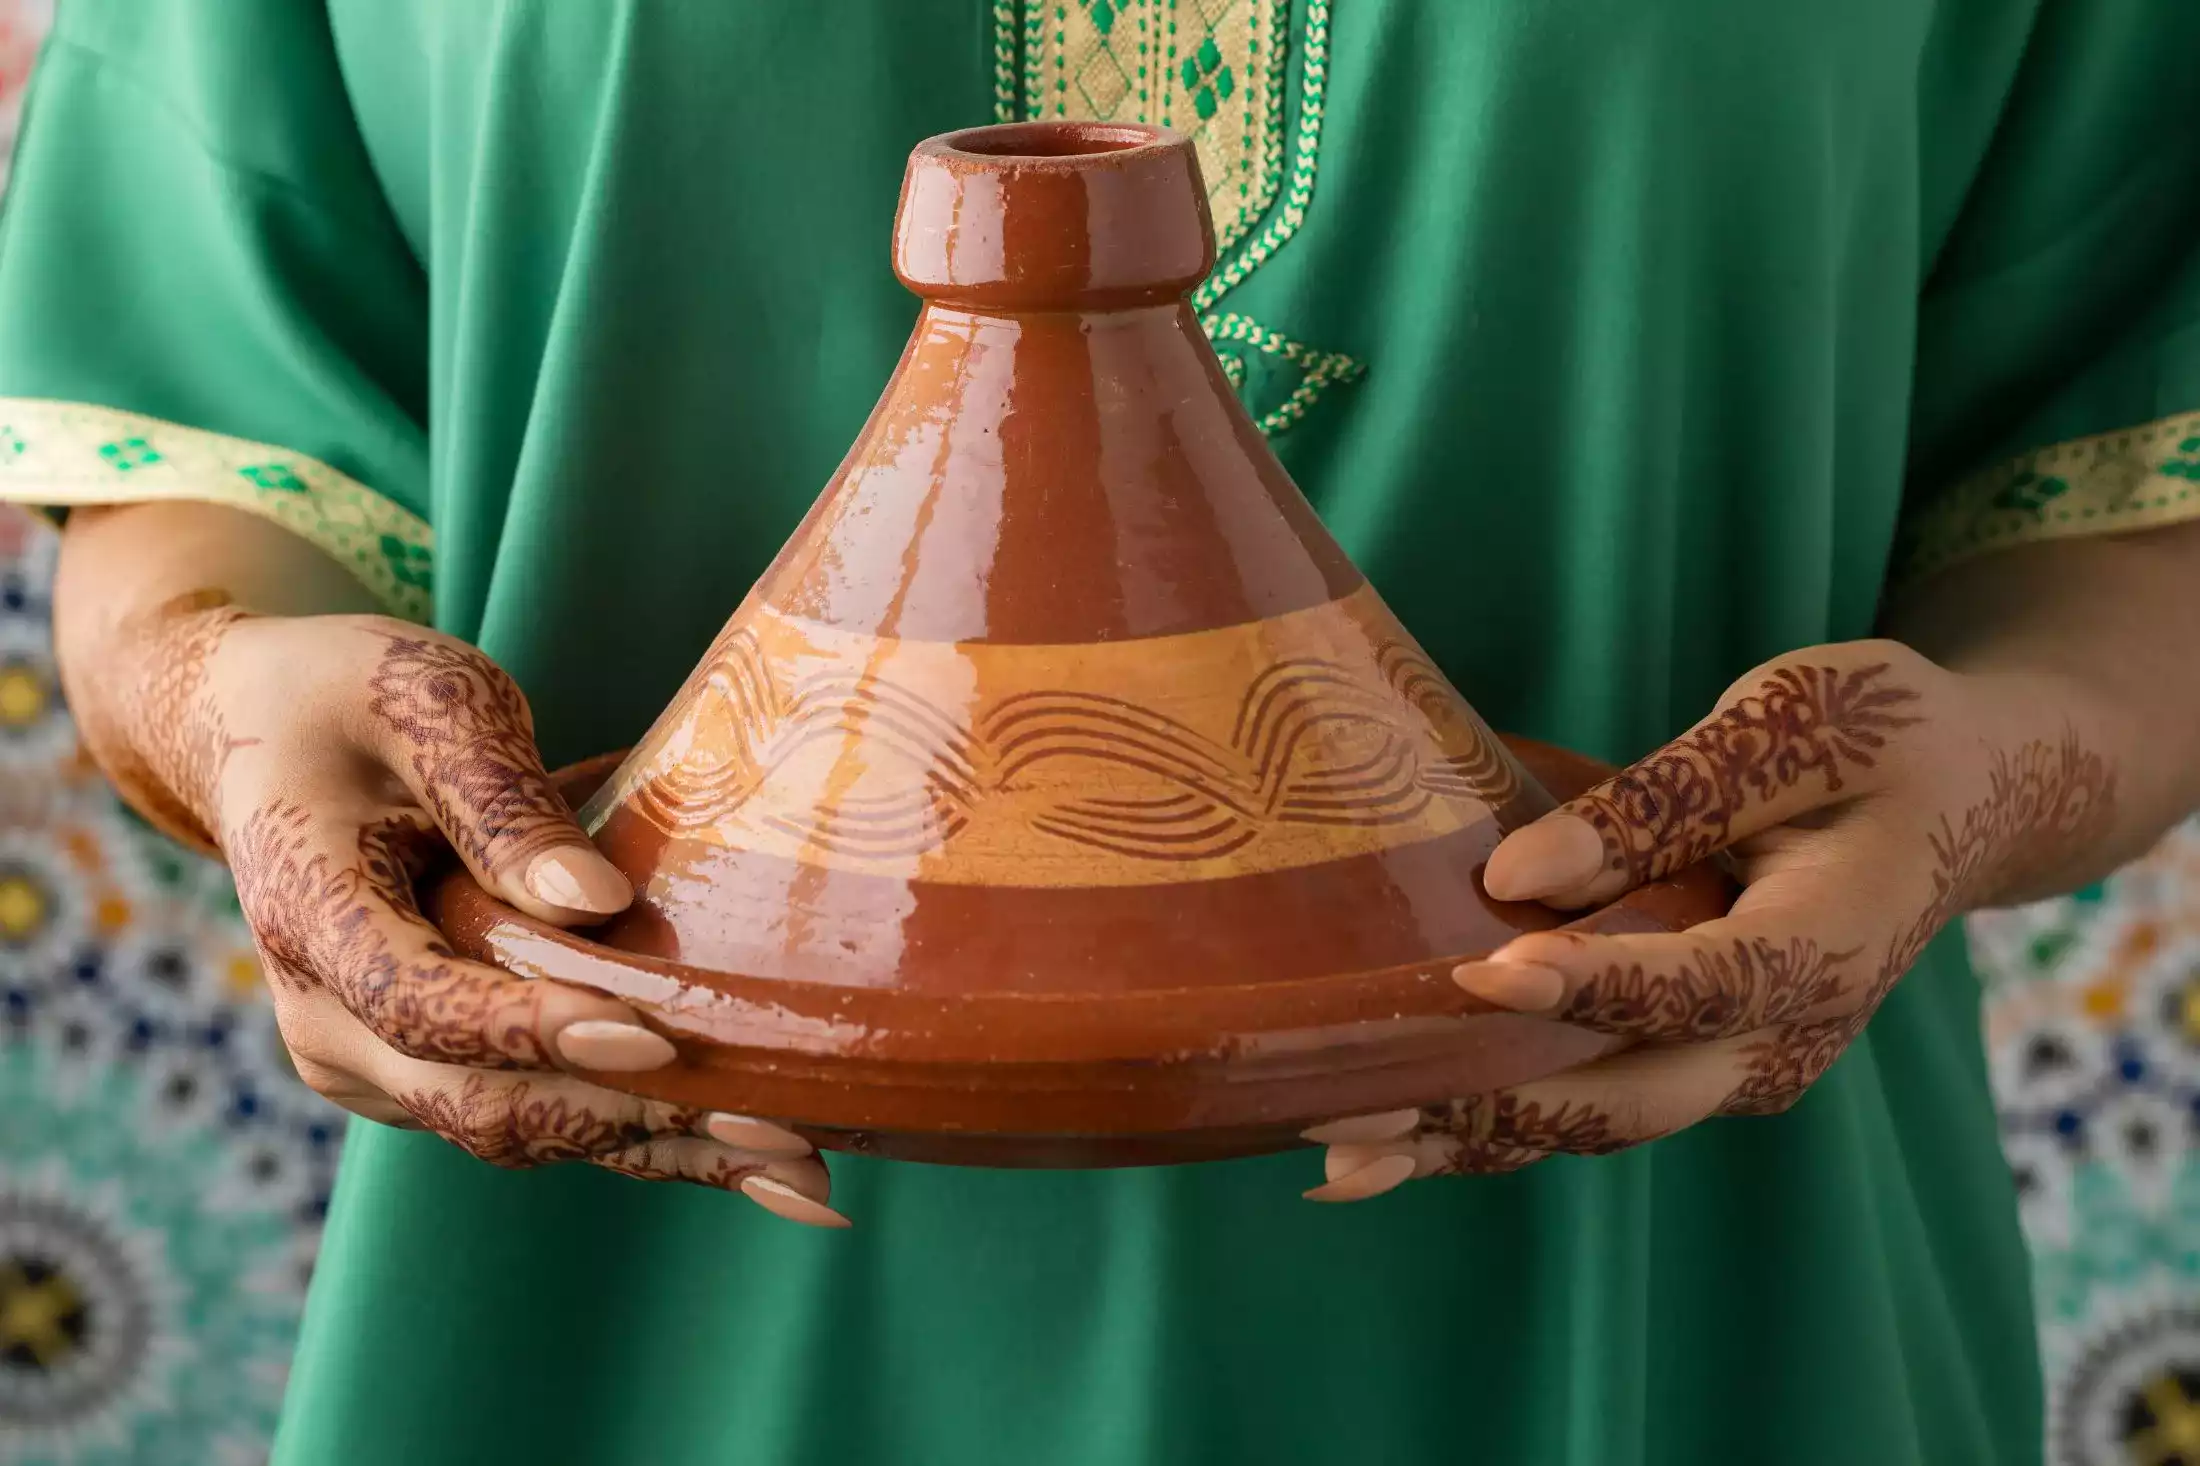 Moroccan woman with henna painted hands holding a tagine